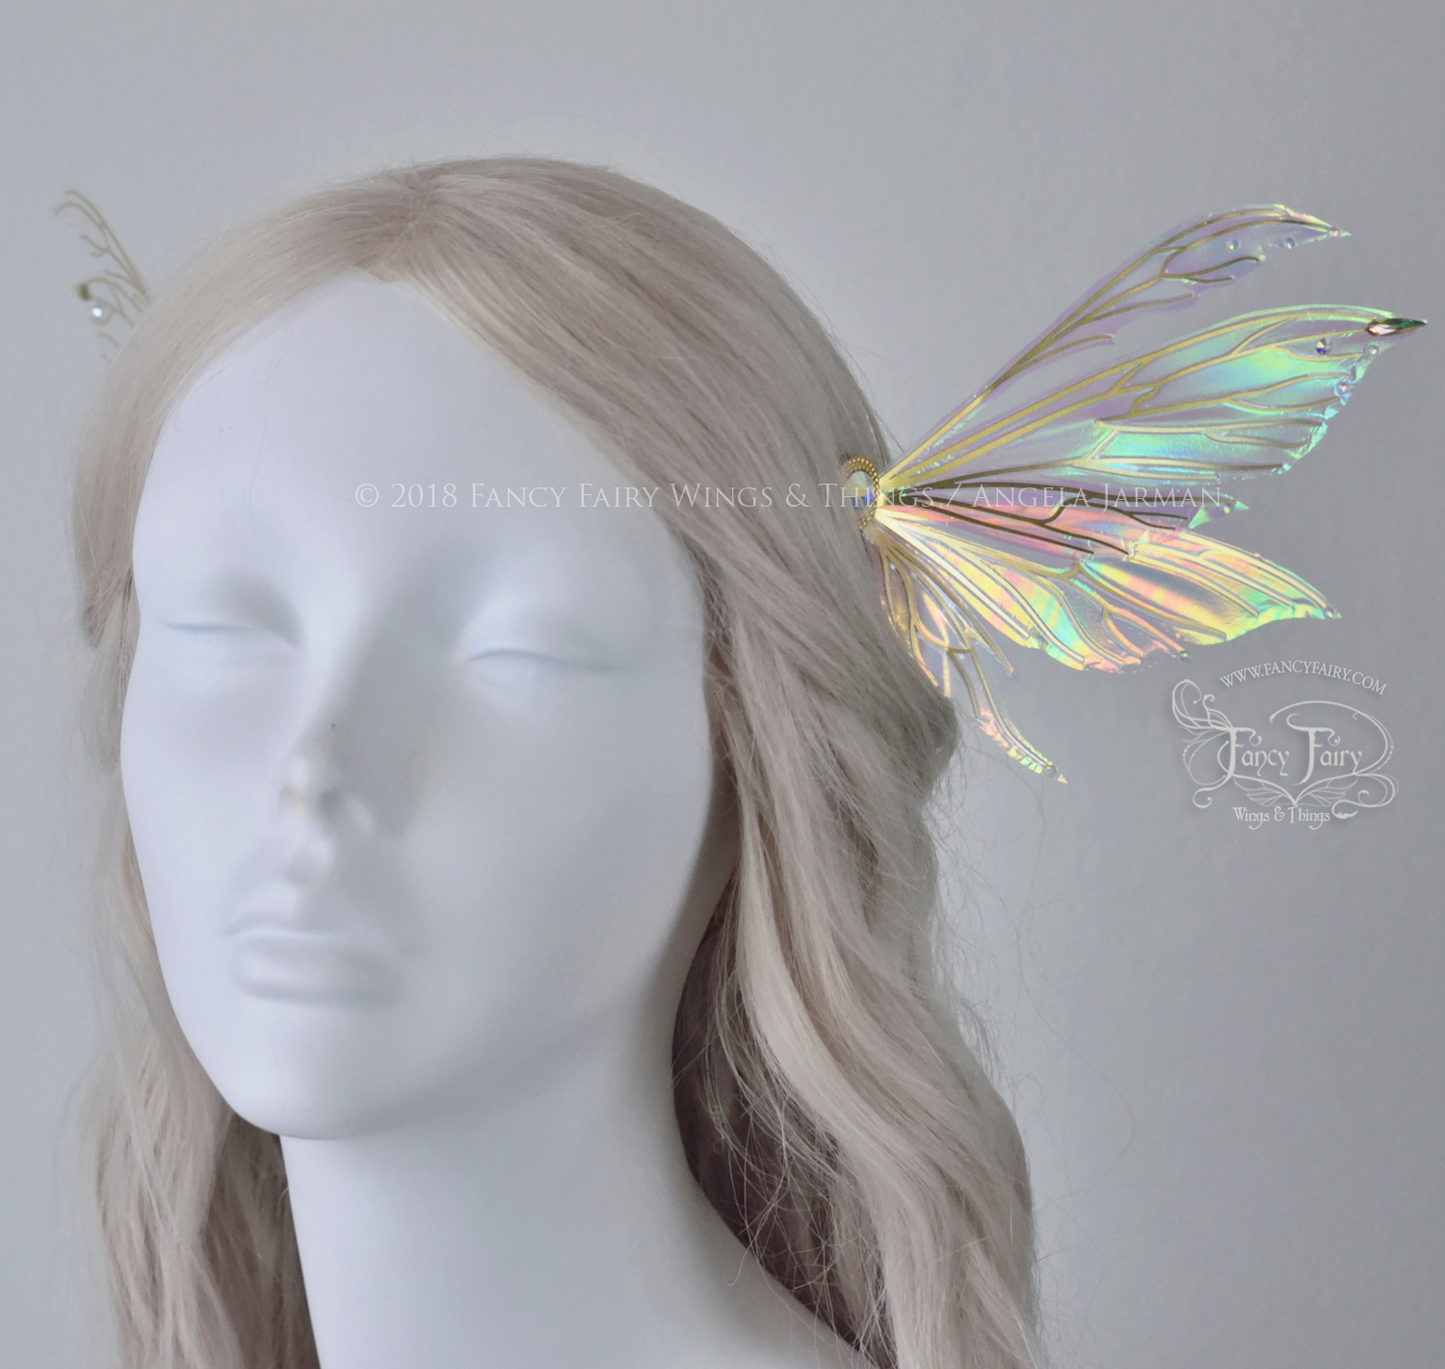 Aynia 5 inch Fairy Wings Hair Pins in Iridescent Satin White with Brass Veins